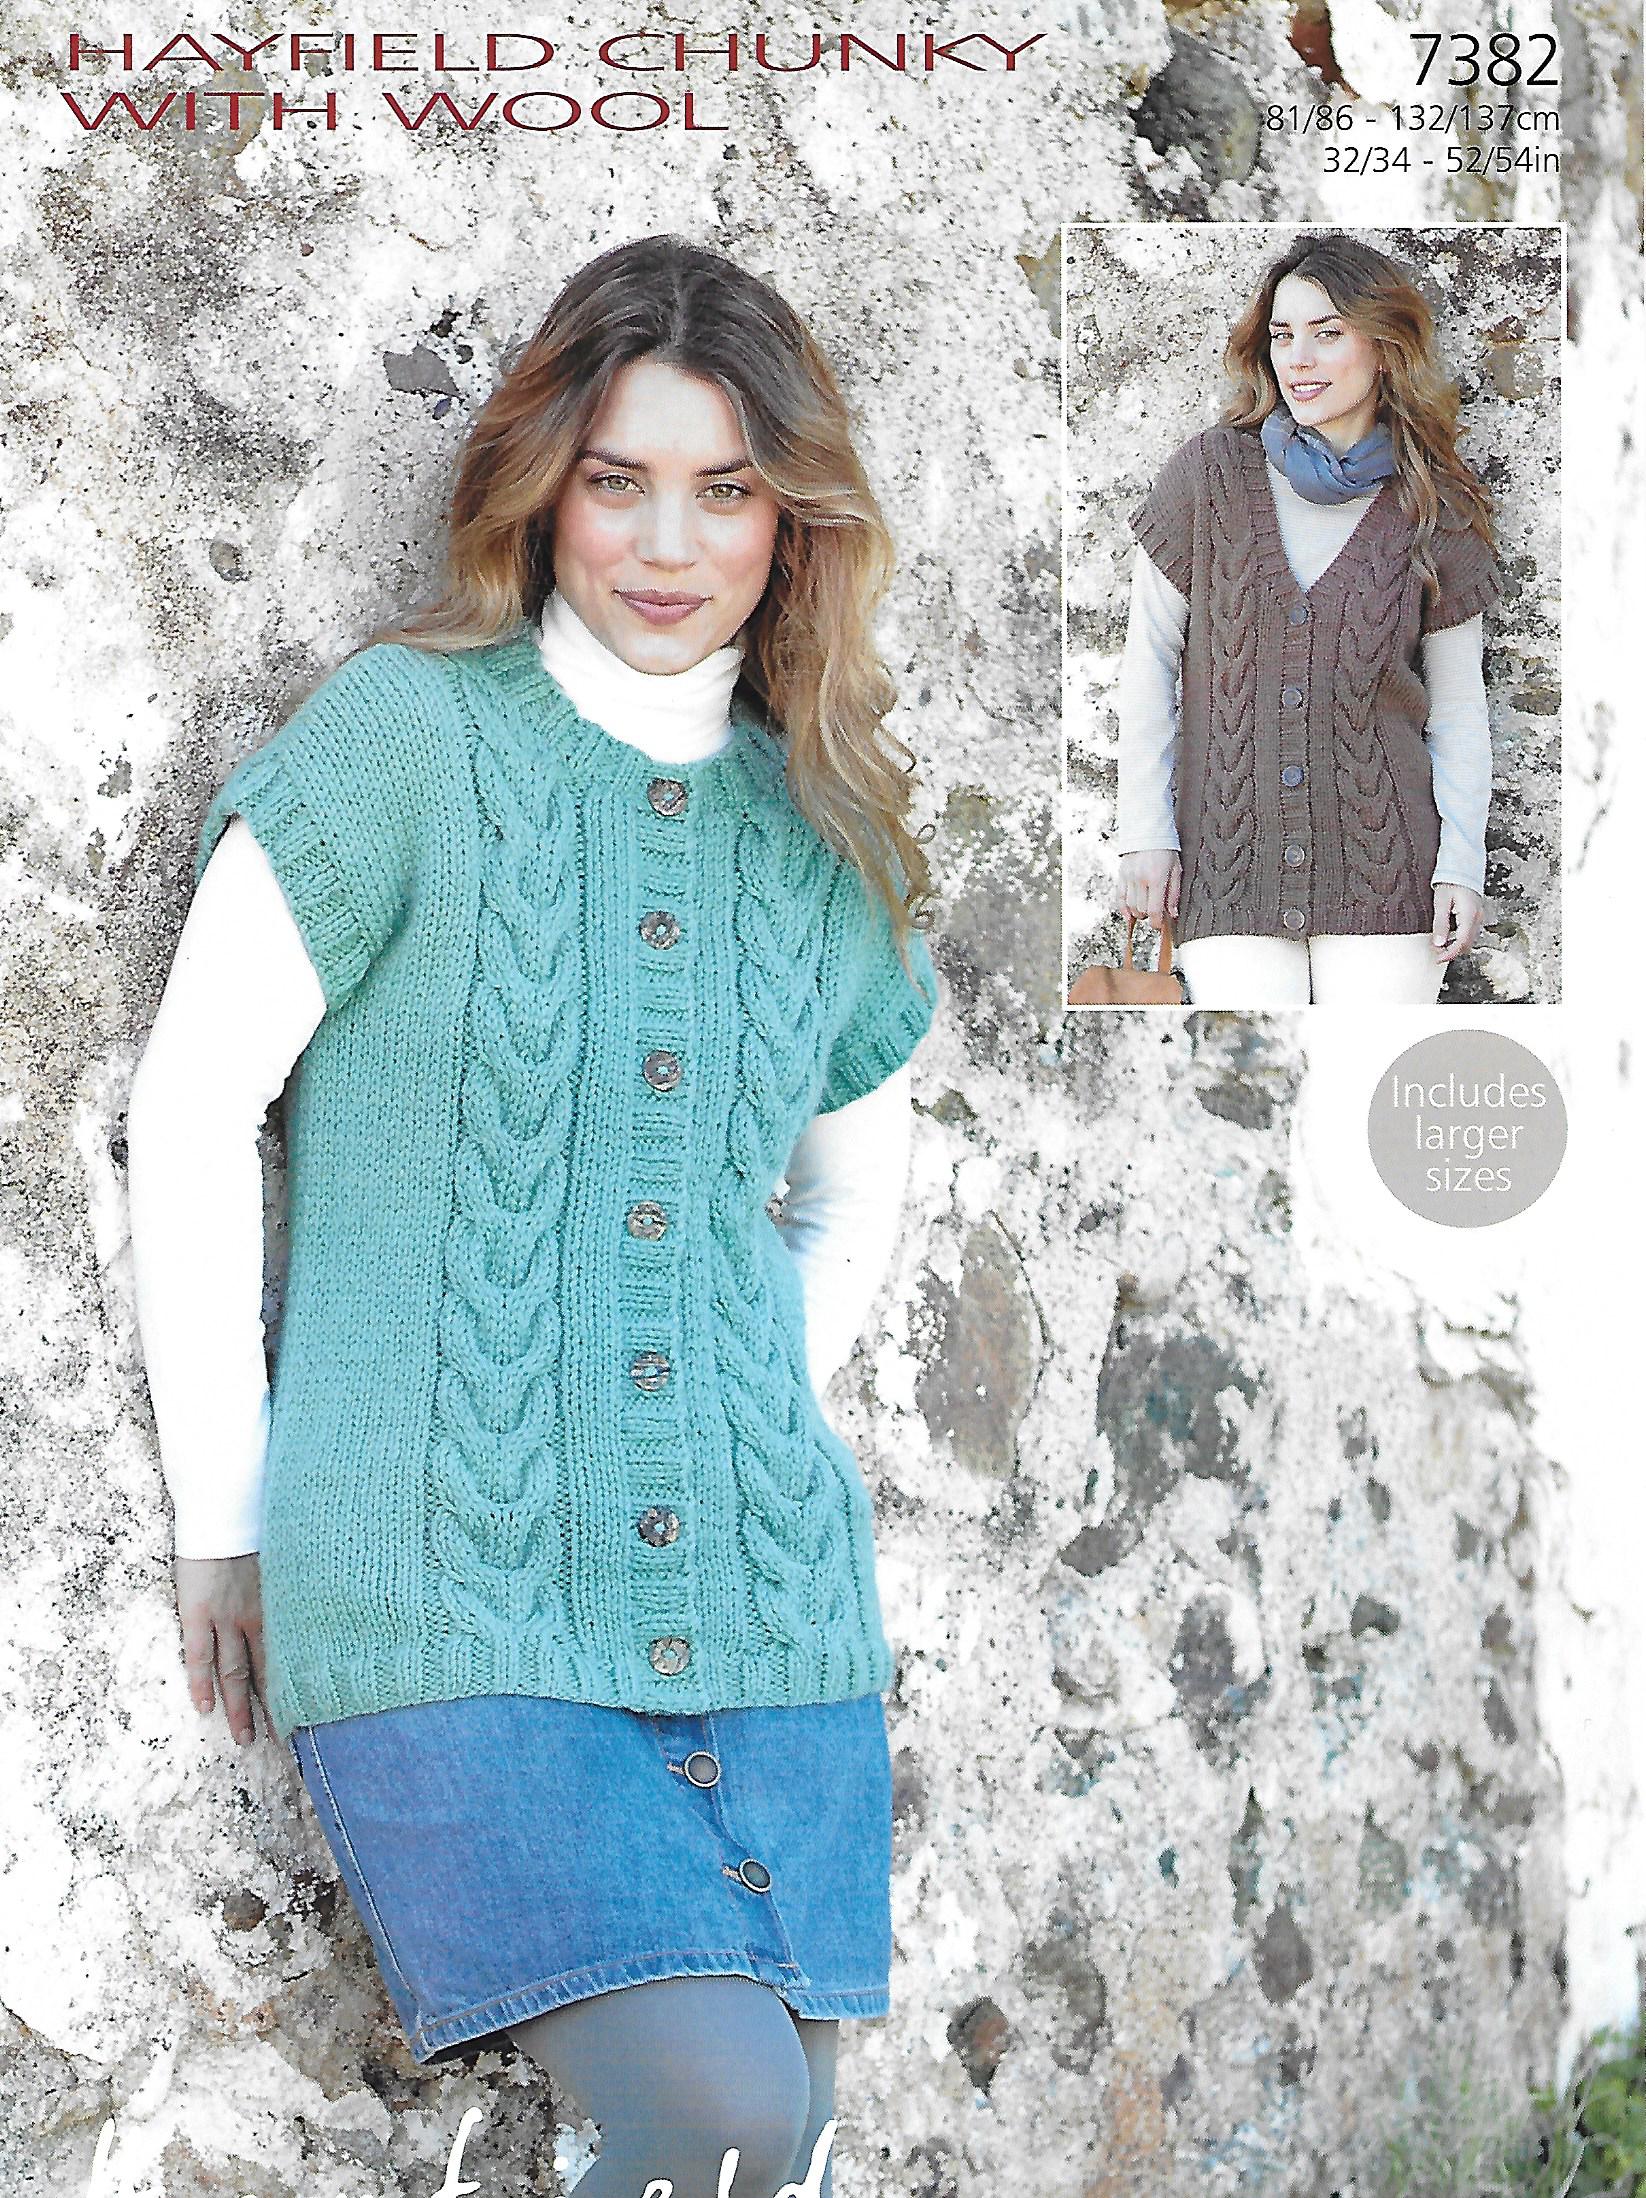 Hayfield 7382 Gilets/Vests knit out of chunky (#5) weight yarn. Sizes 32" to 54".